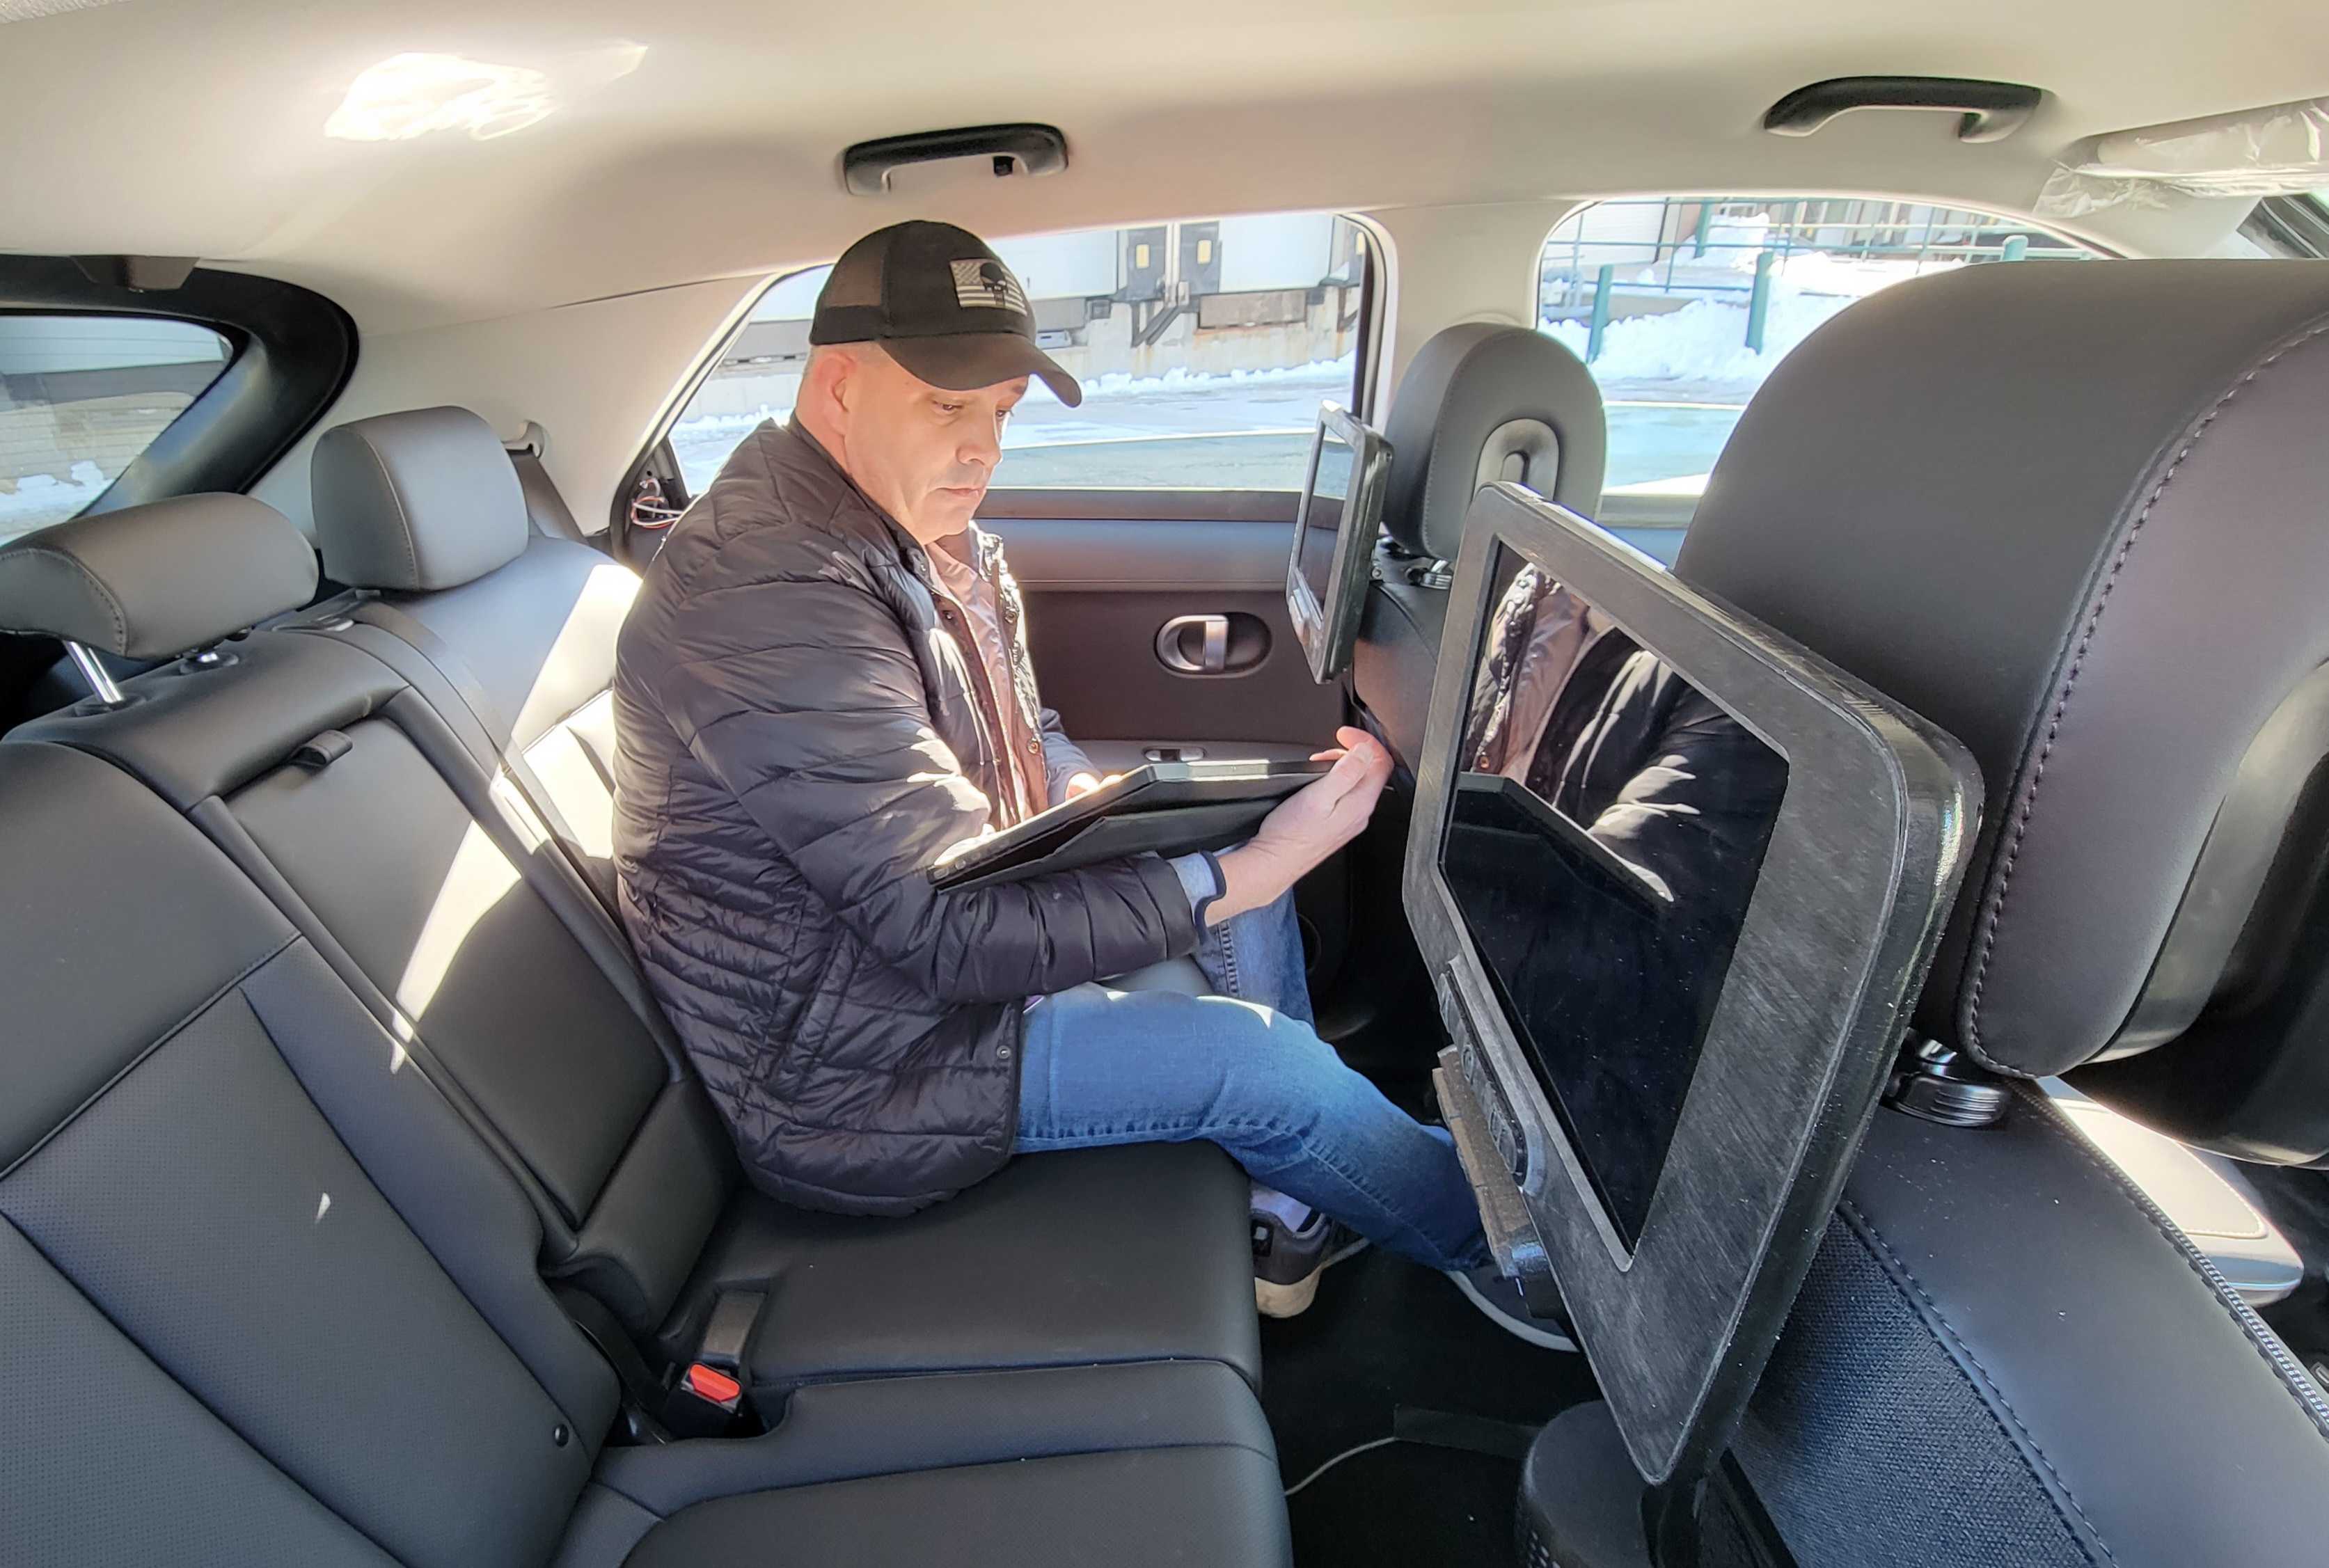 A Motional employee takes notes on a tablet while sitting in the backseat of an IONIQ 5 robotaxi 